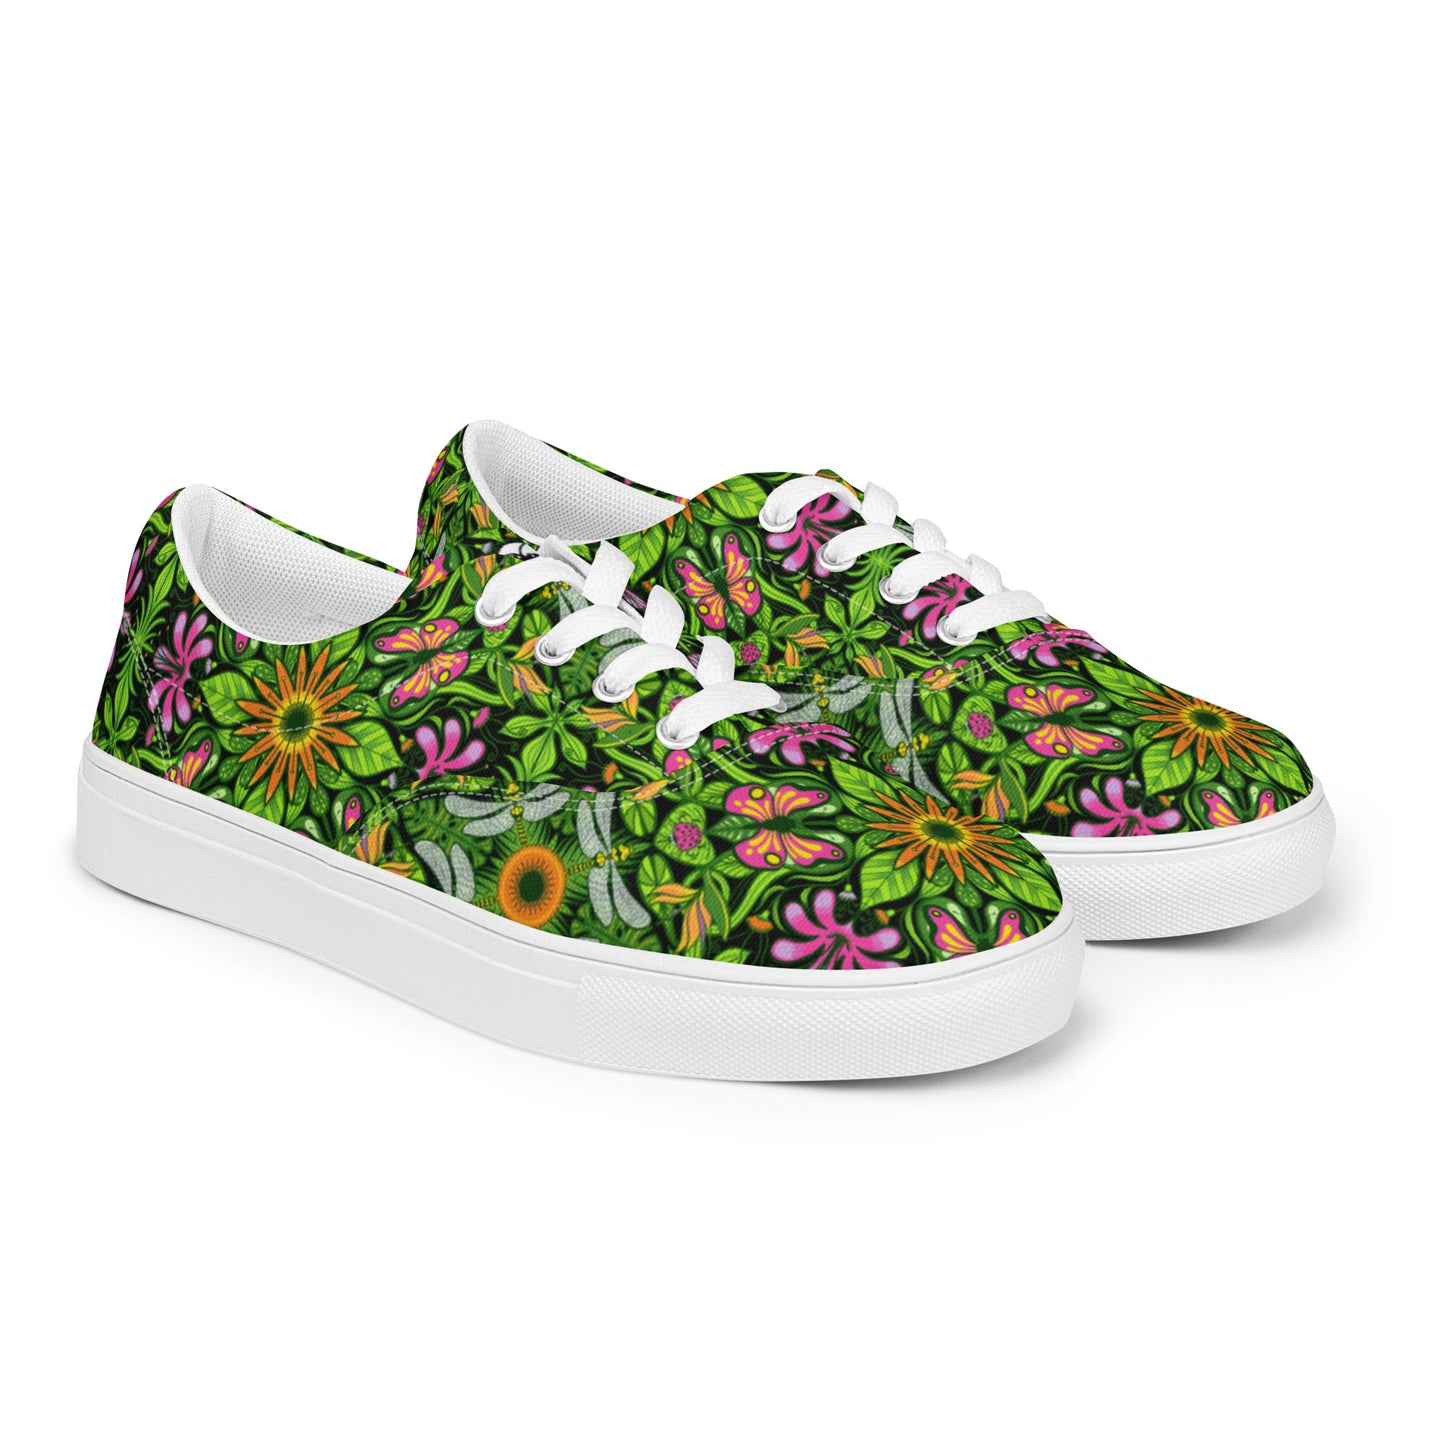 Magical garden full of flowers and insects Women’s lace-up canvas shoes. Overview